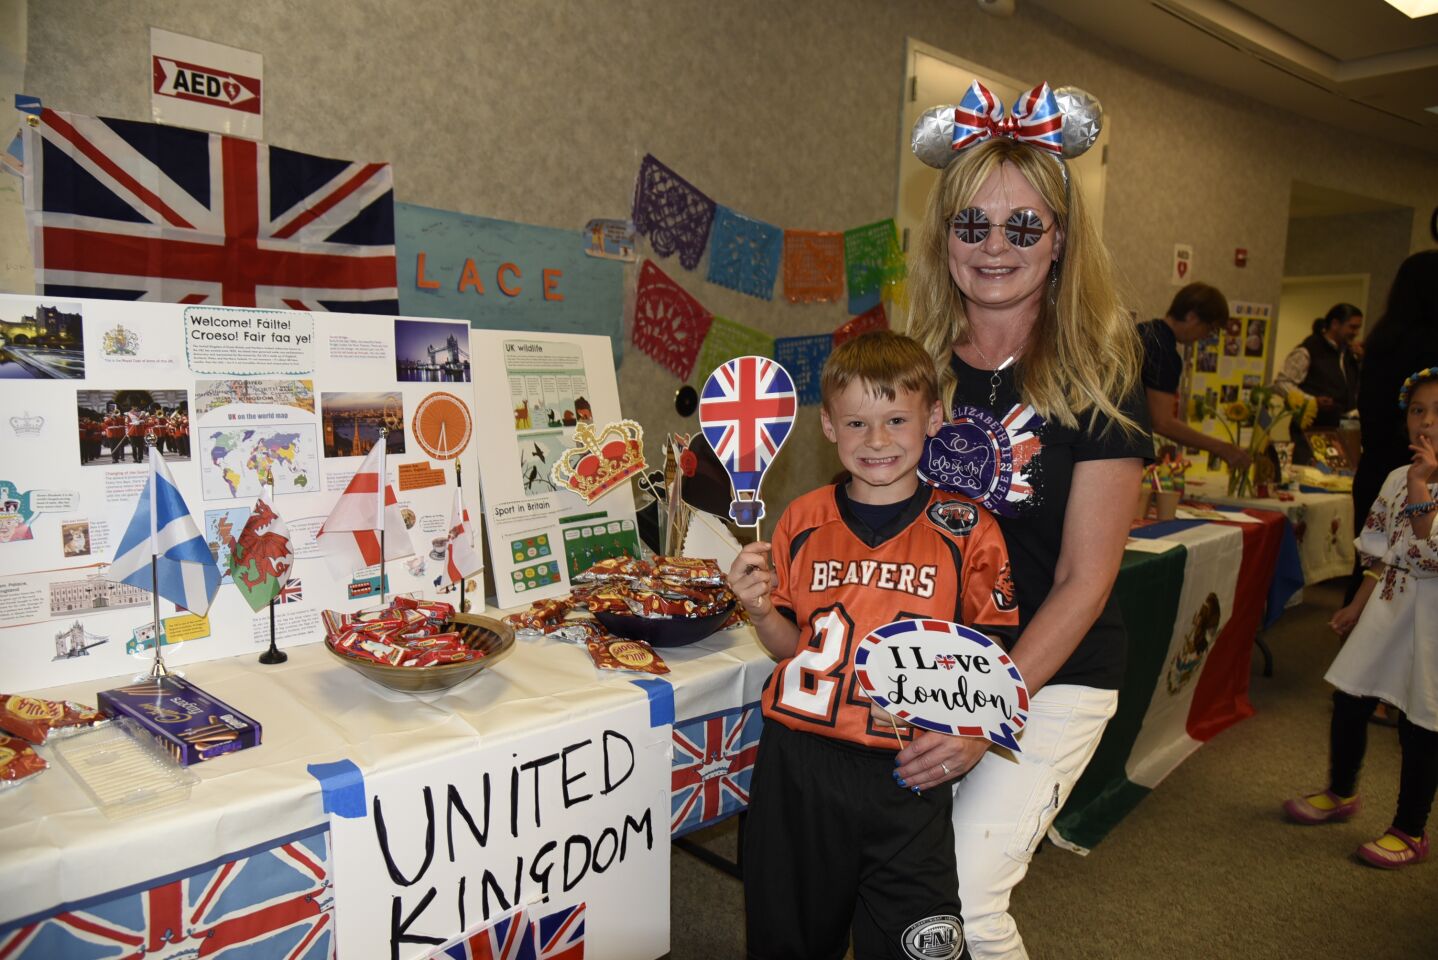 United Kingdom is represented by Susan Uhlir with Steven